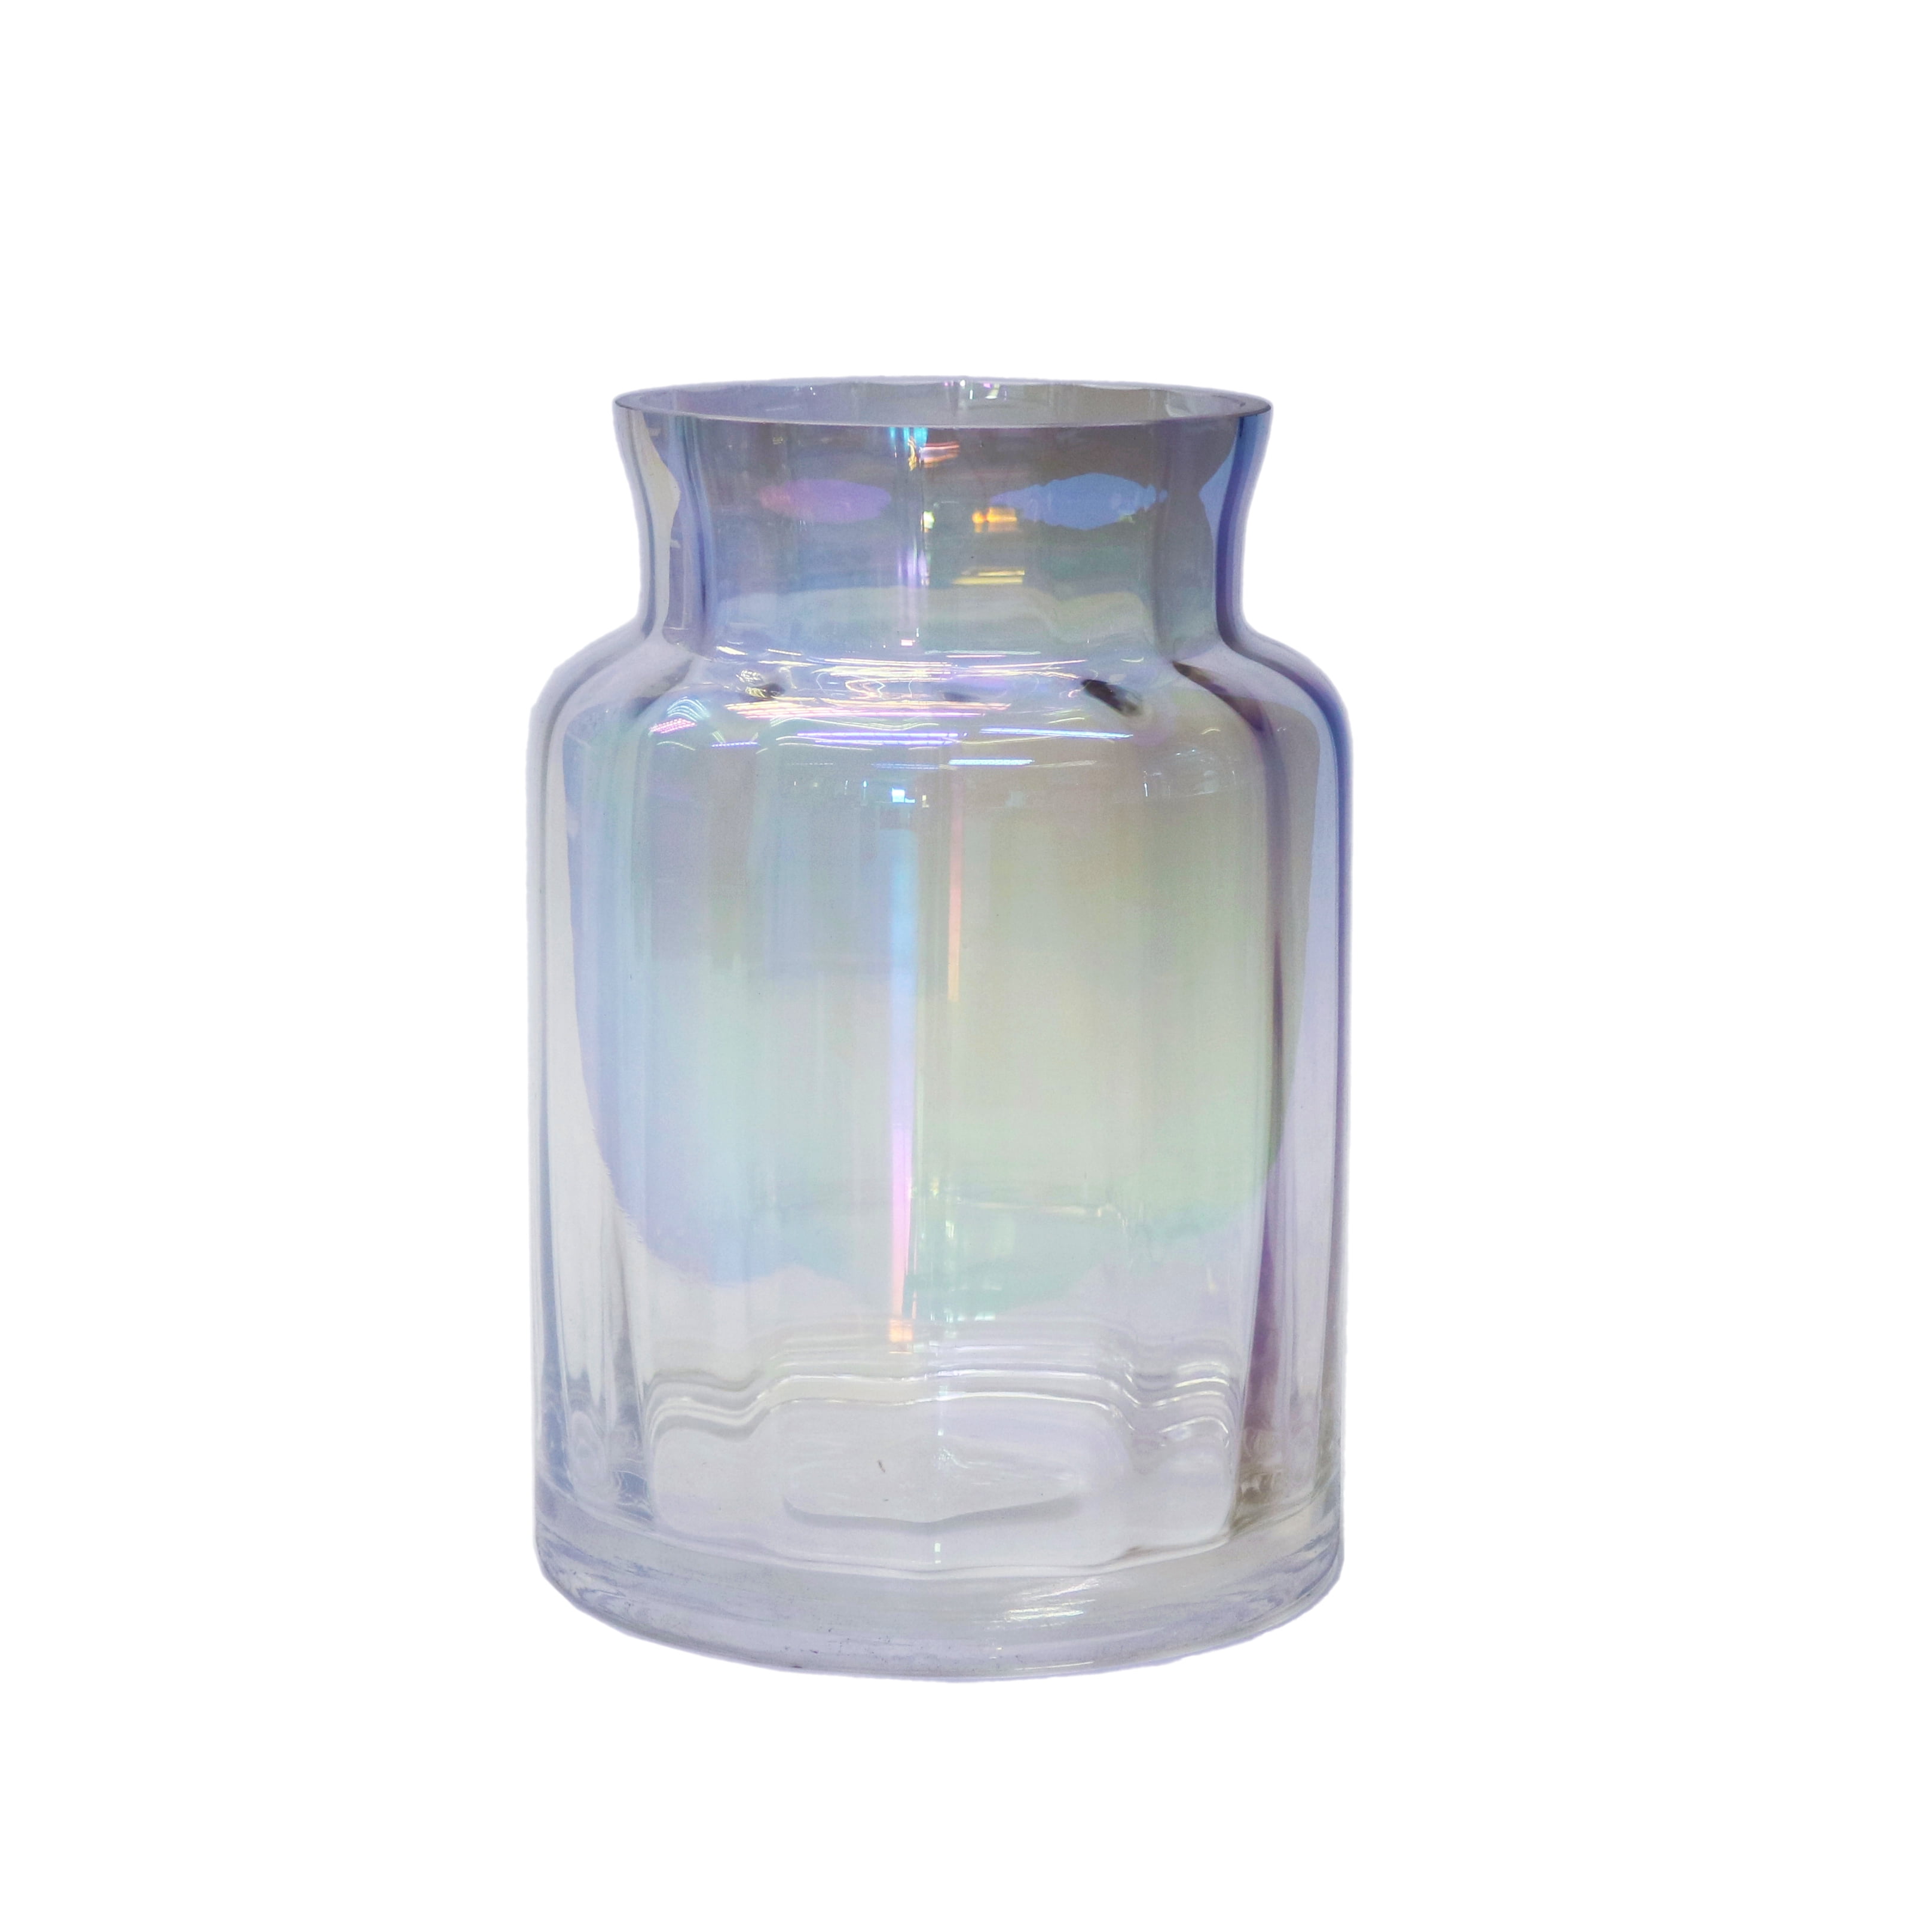 Mainstays 7.9" Glass Vase Container in Iridescent, Modern and Simple Stylish Design